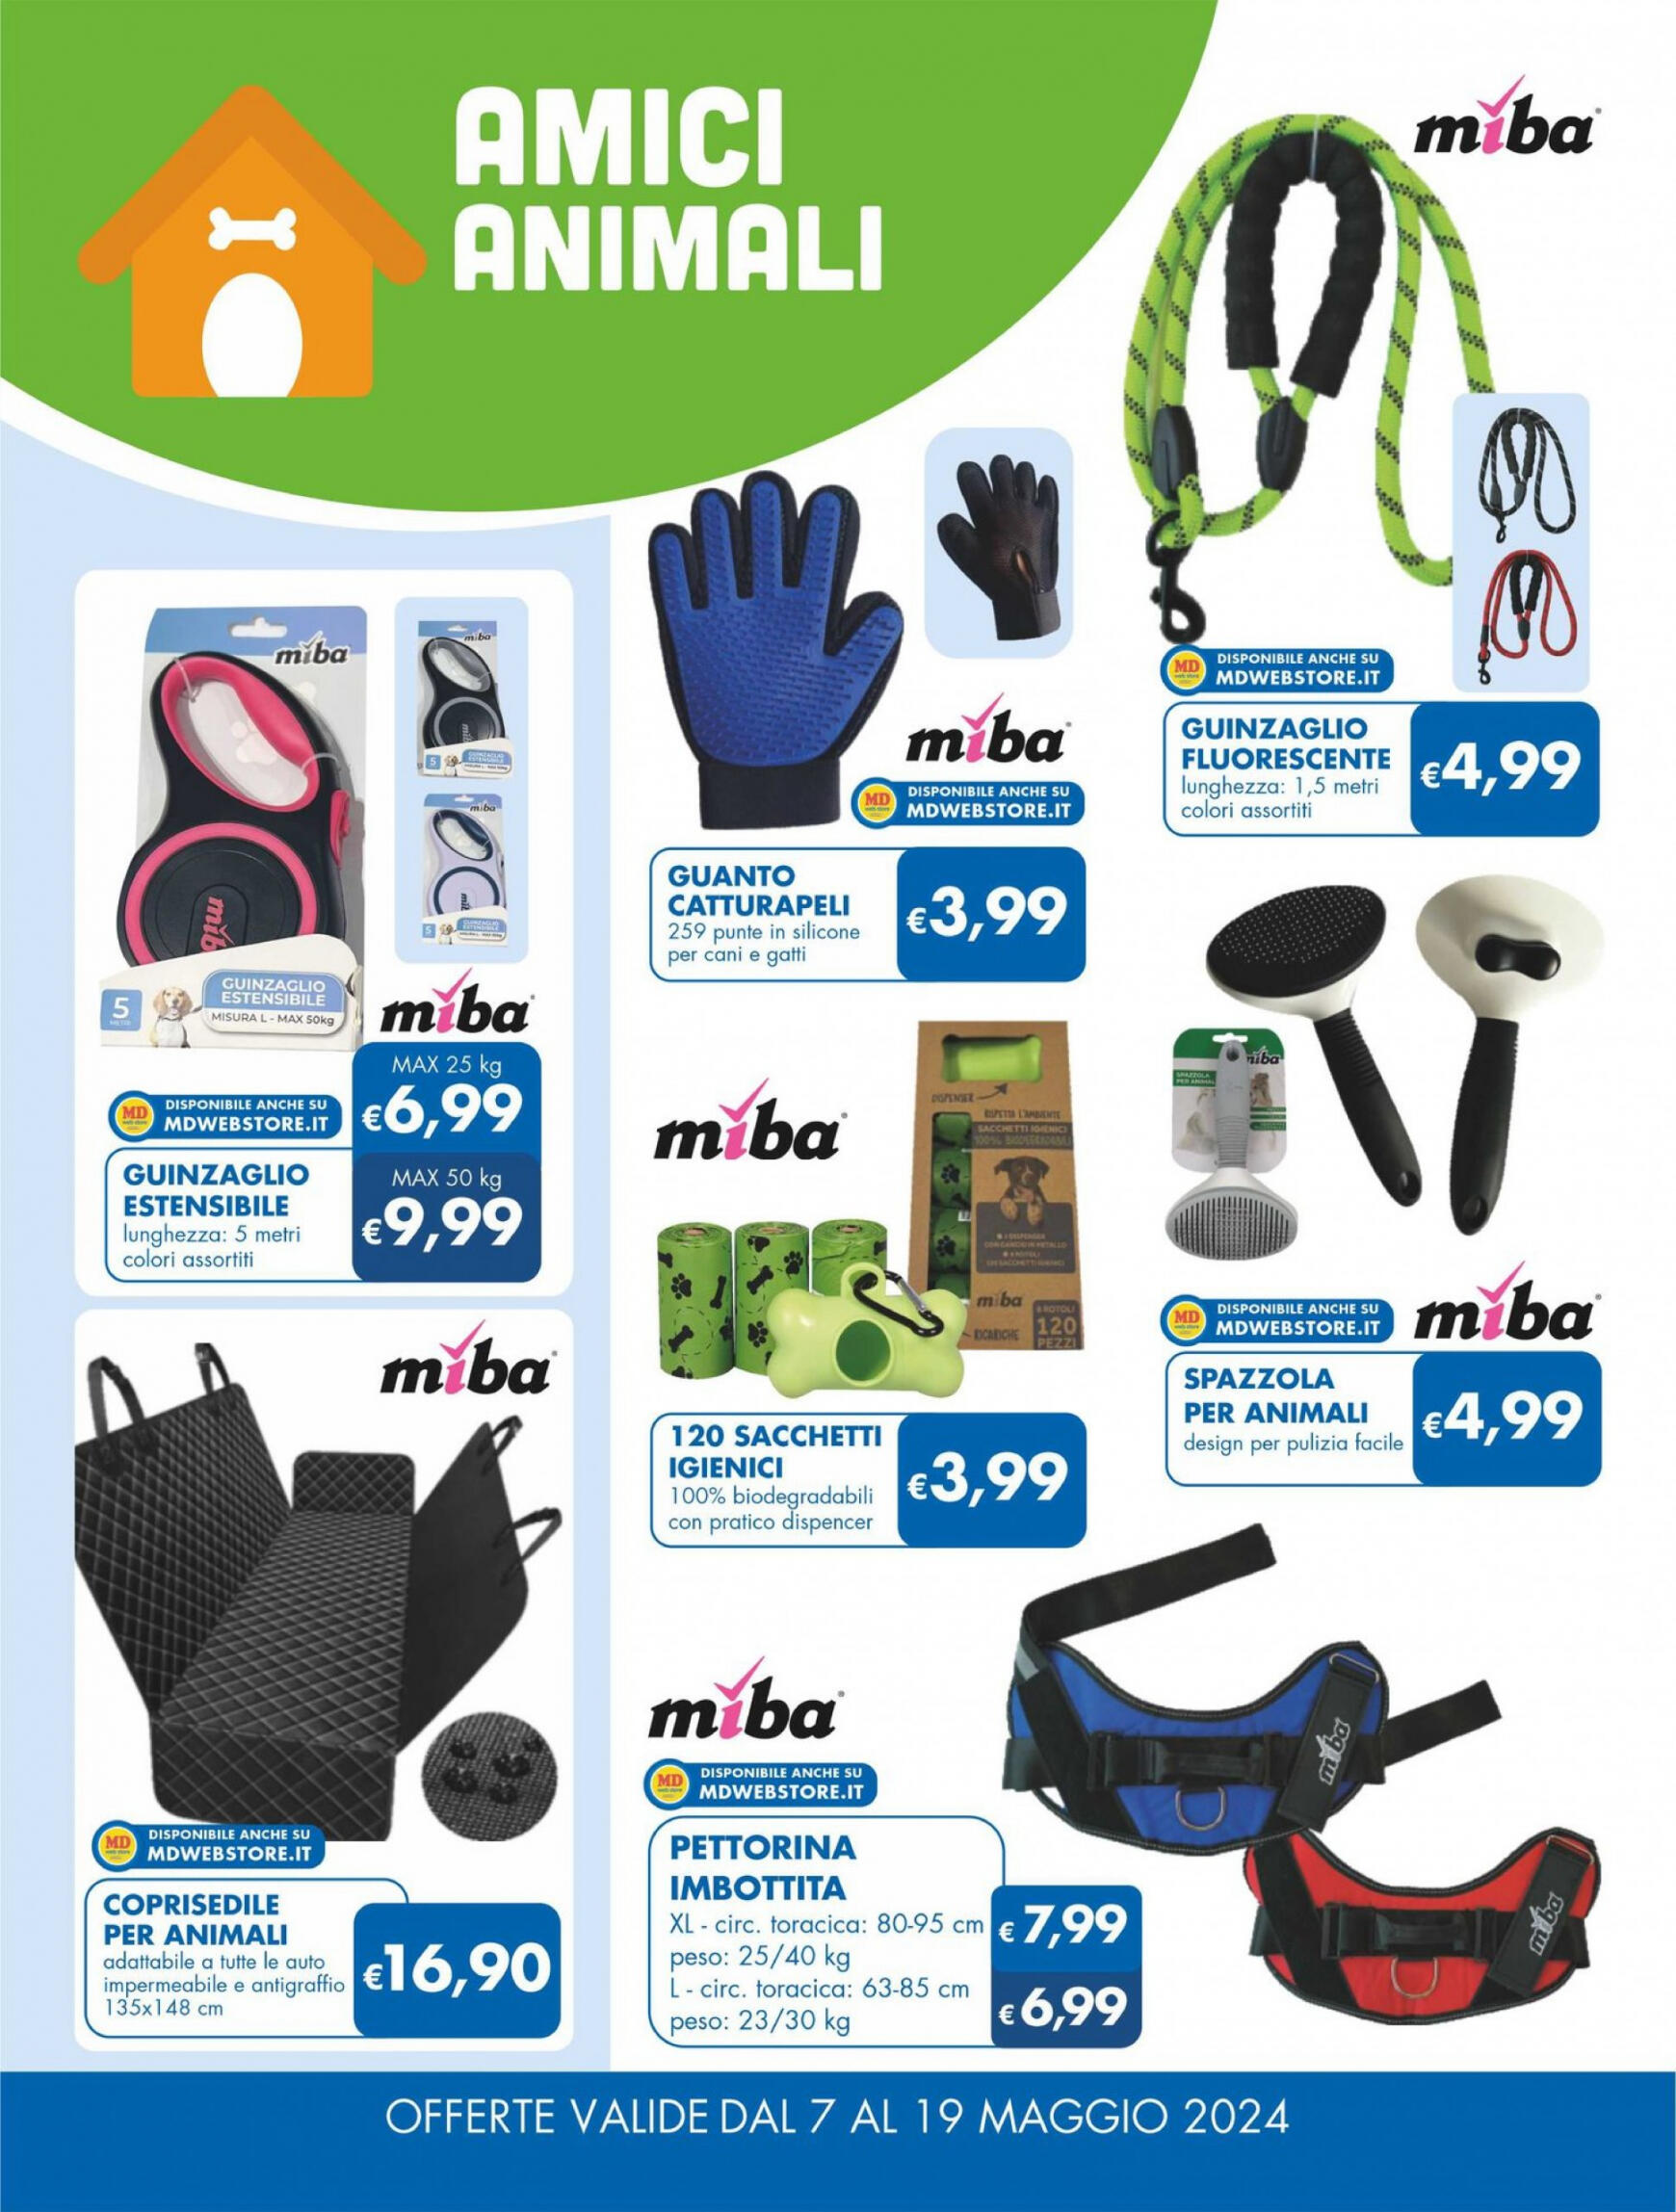 md-discount - Nuovo volantino MD - MD Discount 07.05. - 19.05. - page: 24